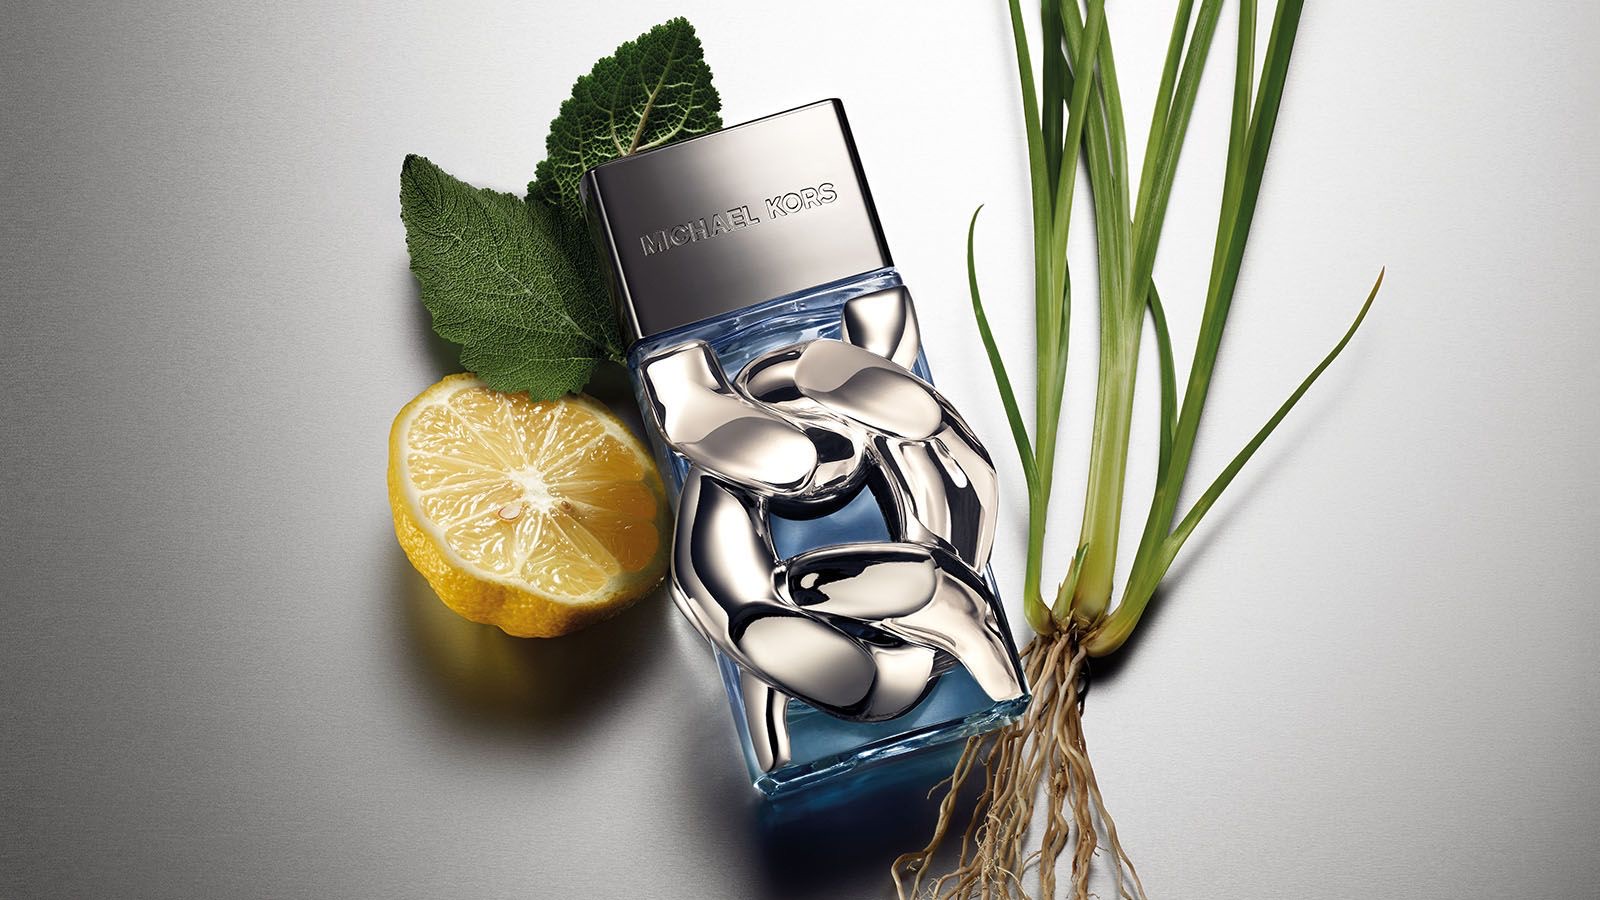 Michael Kors Pour Homme is crafted with a blend that aims to reflect the spirit of a sophisticated and adventurous man